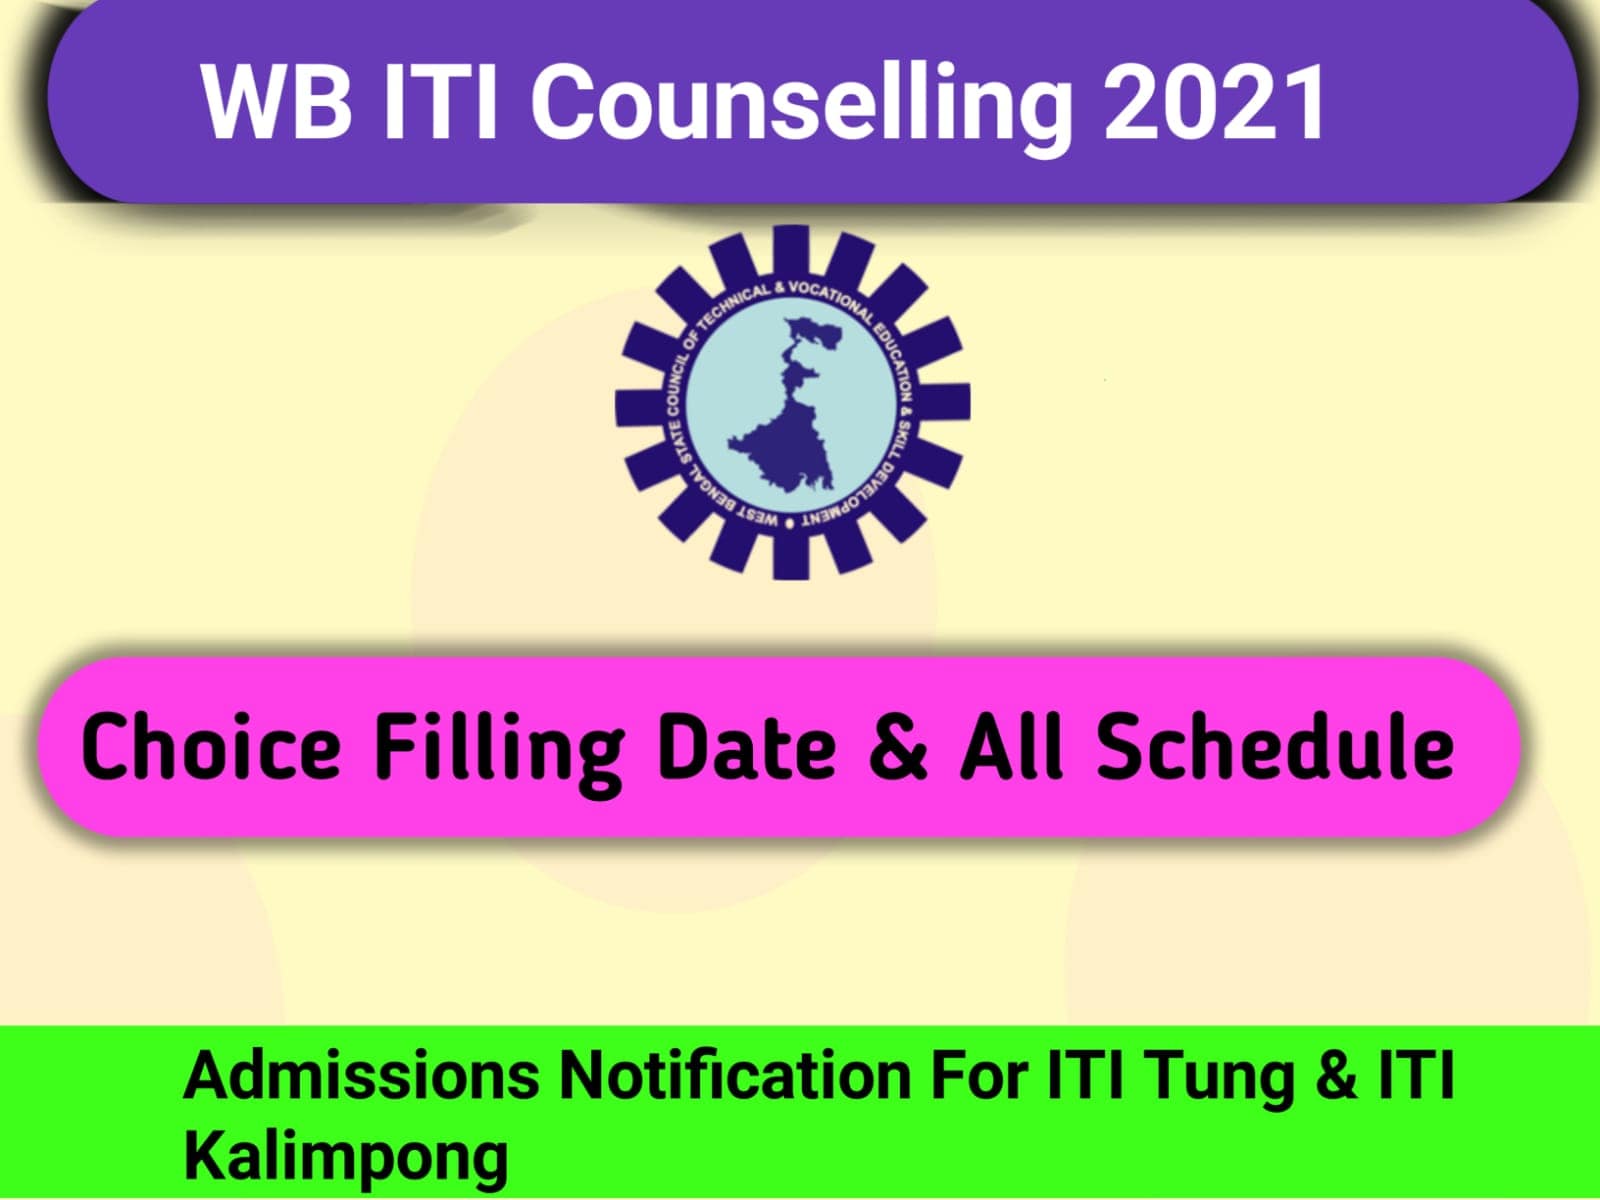 West Bengal ITI Counseling 2021-22 Registration, Schedule & Seat Allotment Results Dates | ITI Admission 2021 - Post Image